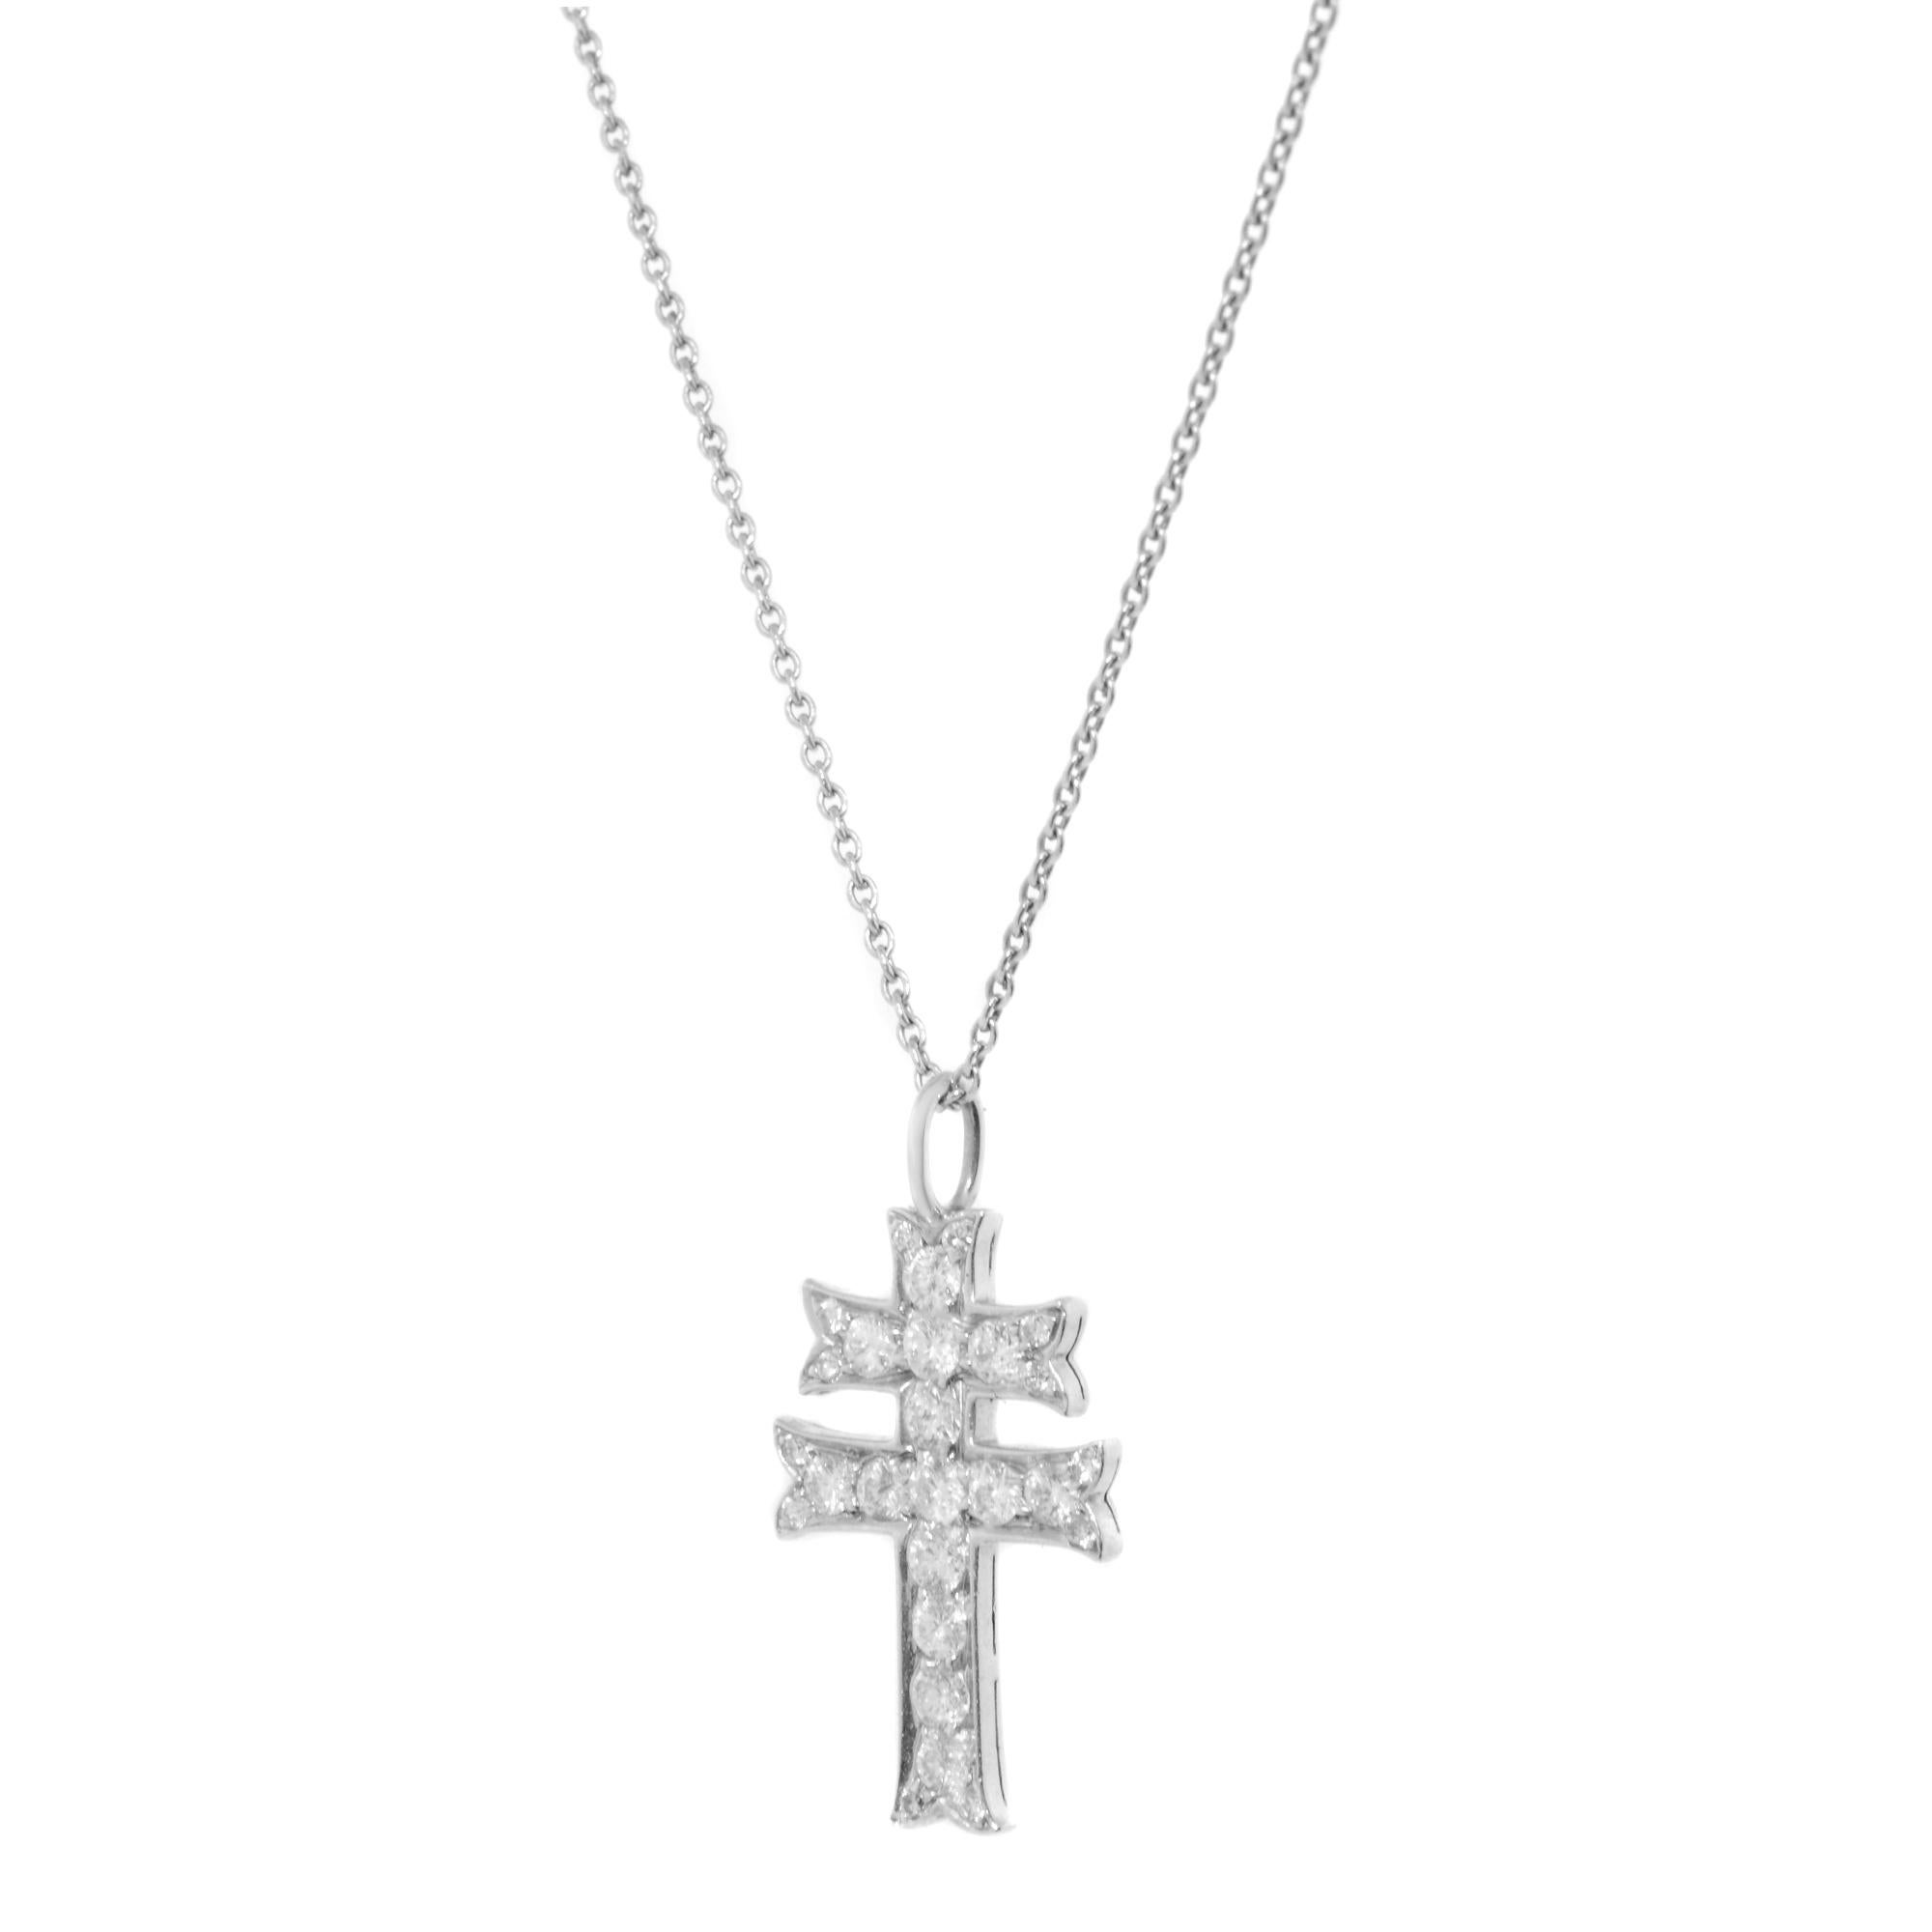 Sometimes a simple cross just isn't what you're looking for. This unique diamond cross pendant is crafted in platinum with pave set round cut diamonds. The cross measures 10mm from top to bottom and the chain measures 16 inches. Whether you're